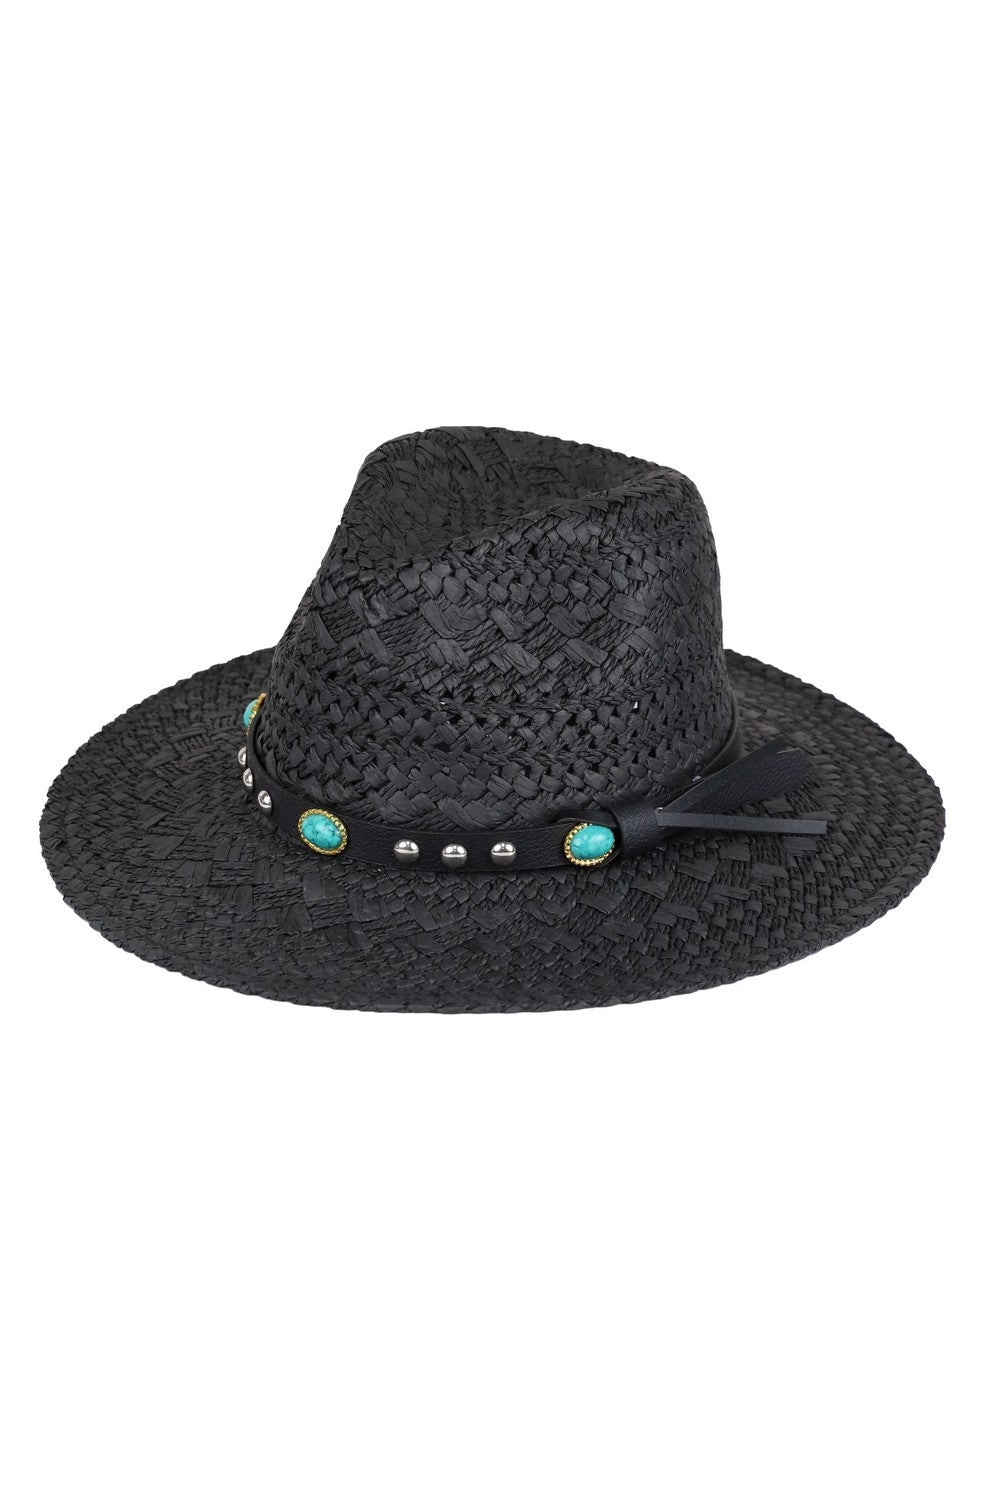 Straw Handmade Sun Hat with Beaded Band Black - Pack of 6